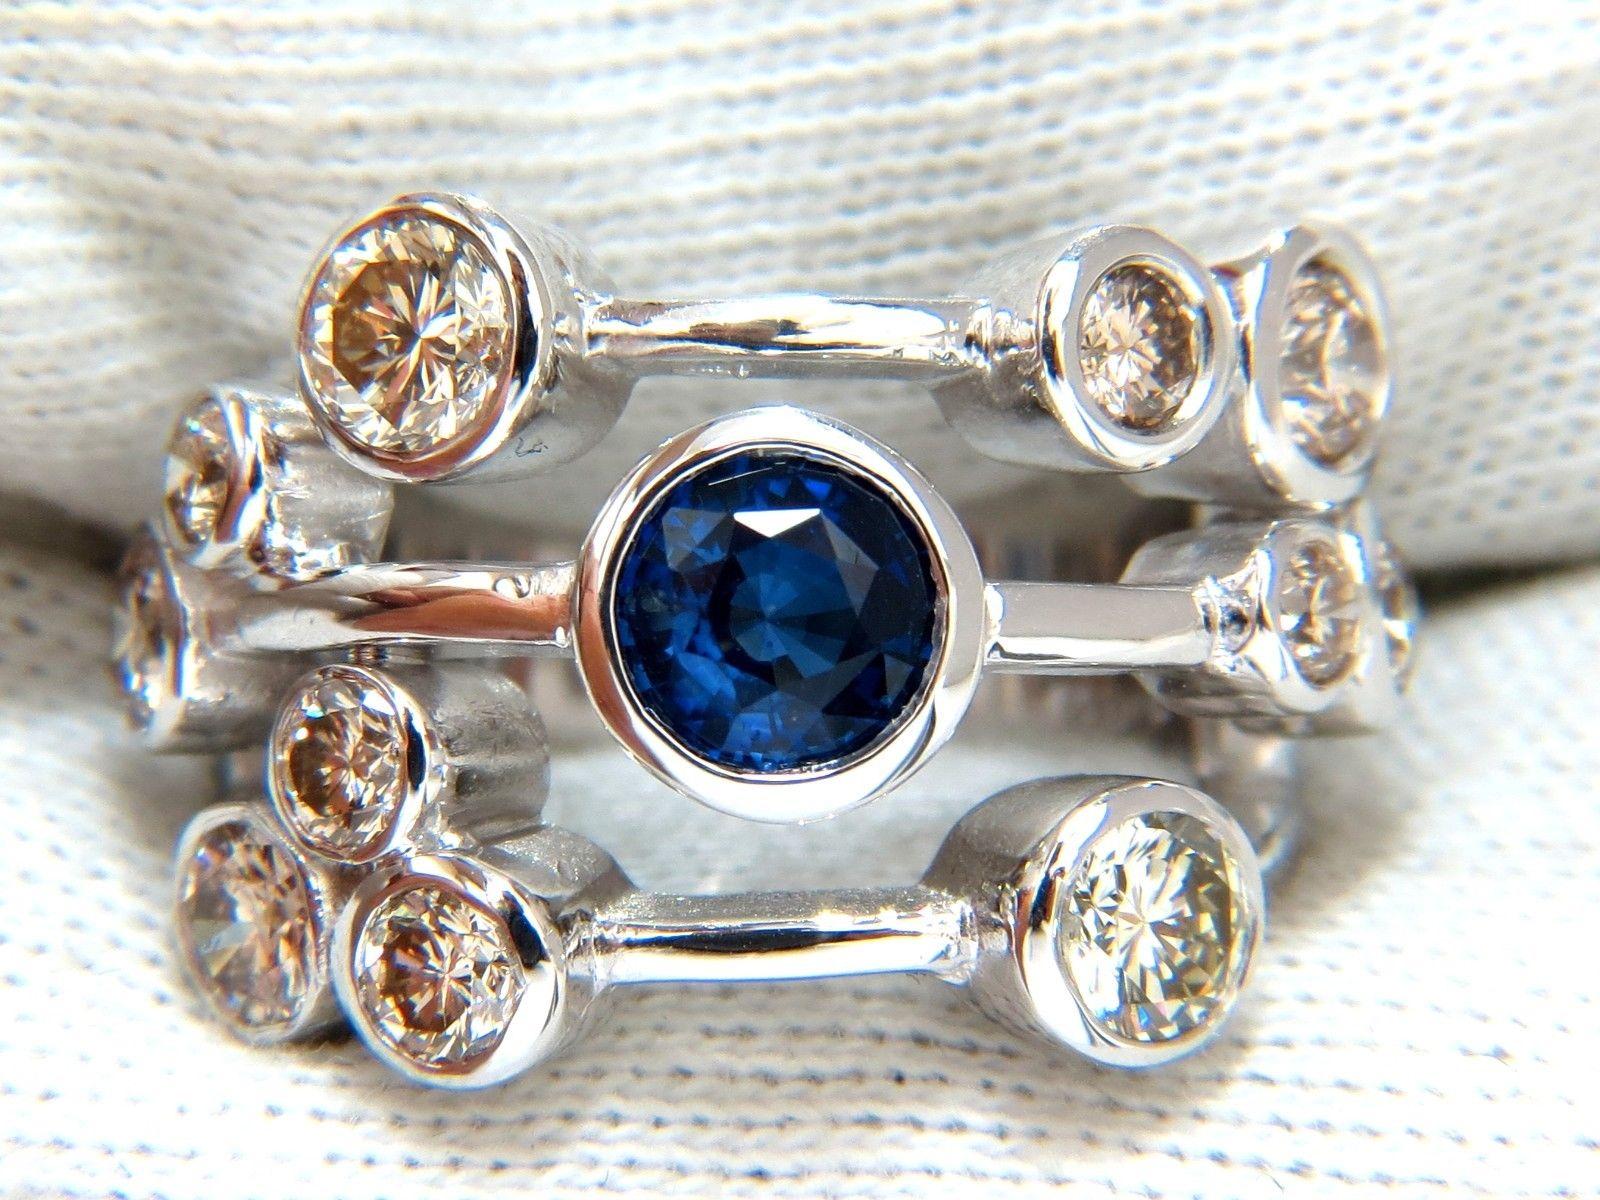 Three Rowed, Station Linked & Flush mounted

2.18ct. Natural Fancy color Light Brown Diamonds 

& 1.02 Natural Round Sapphire ring.

Full cut round brilliants Diamonds & Sapphire.

 vs-2 clarity.

Sapphire, Vivid Royal Blue & Clean Clarity.

  14kt.